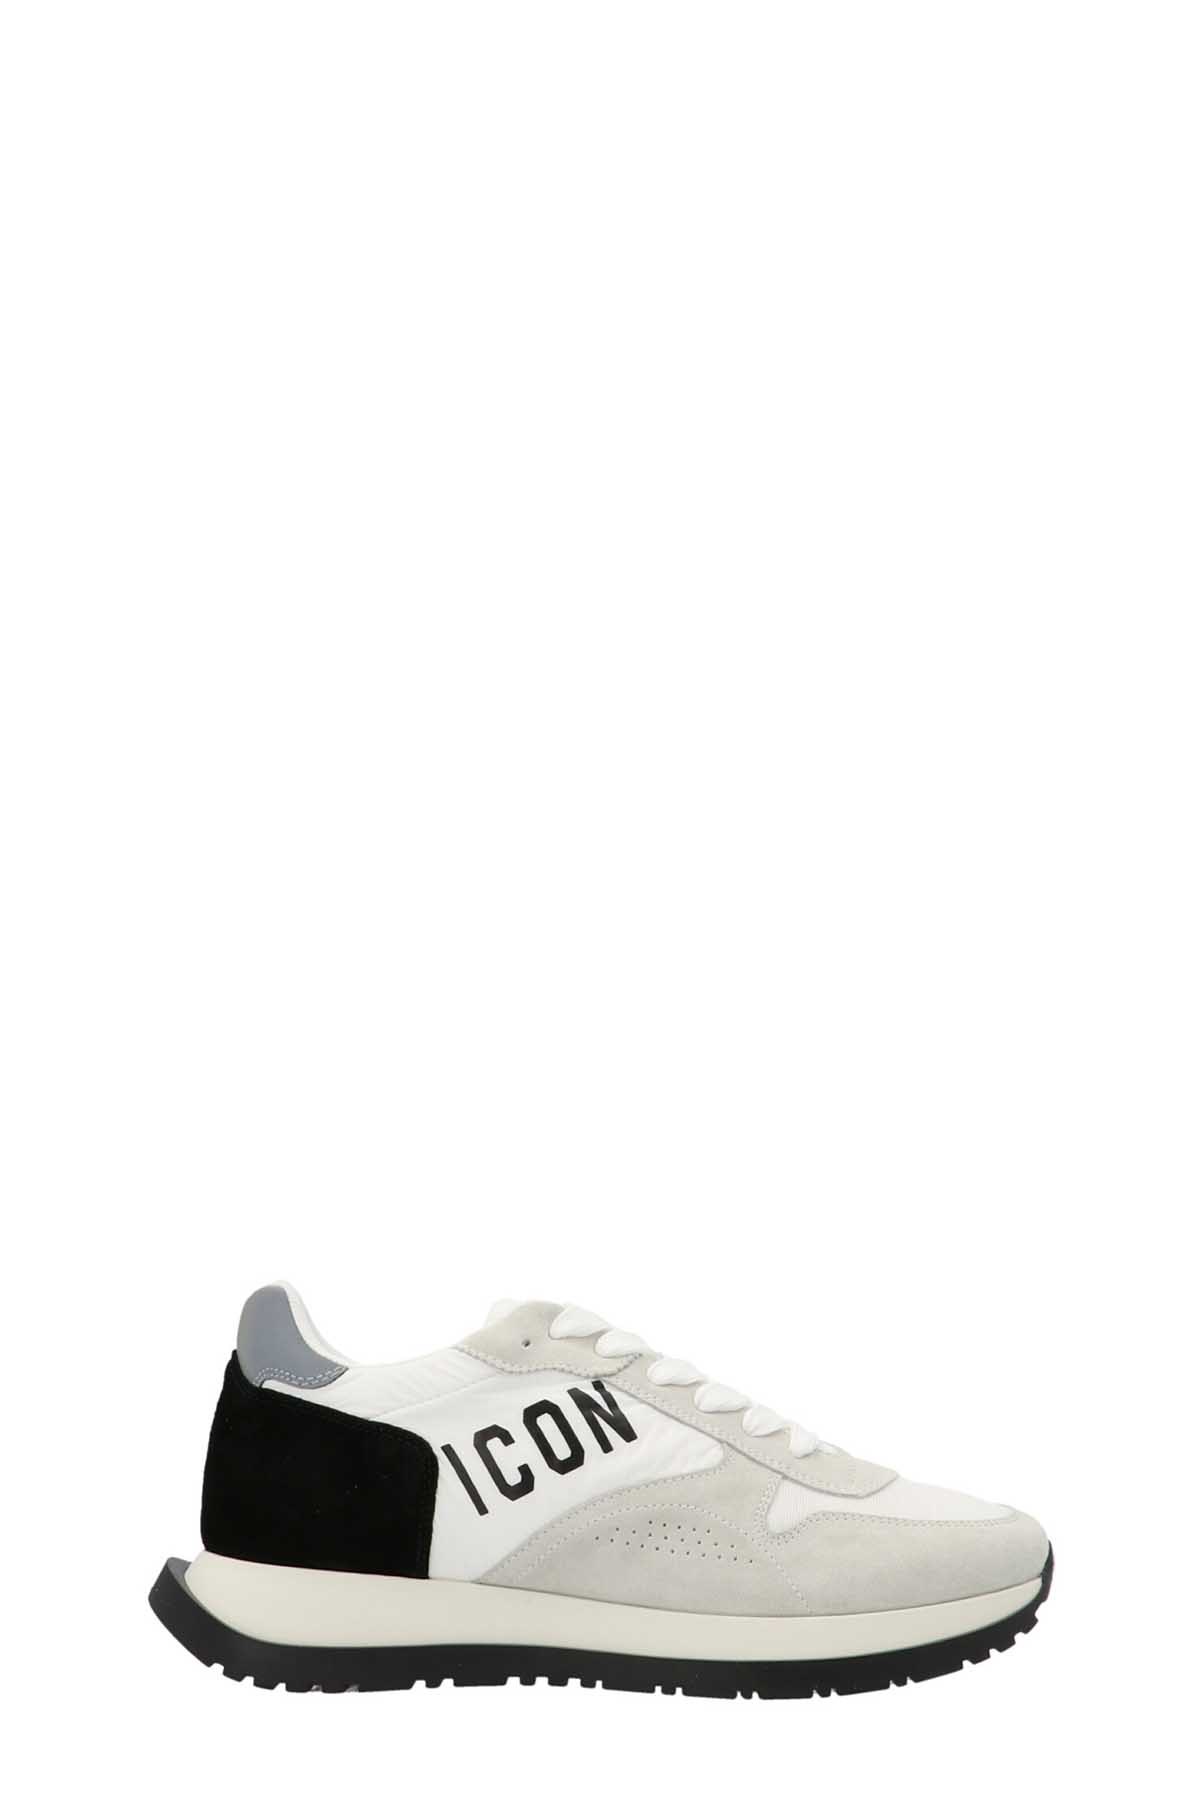 DSQUARED2 'Icon Running’ Sneakers